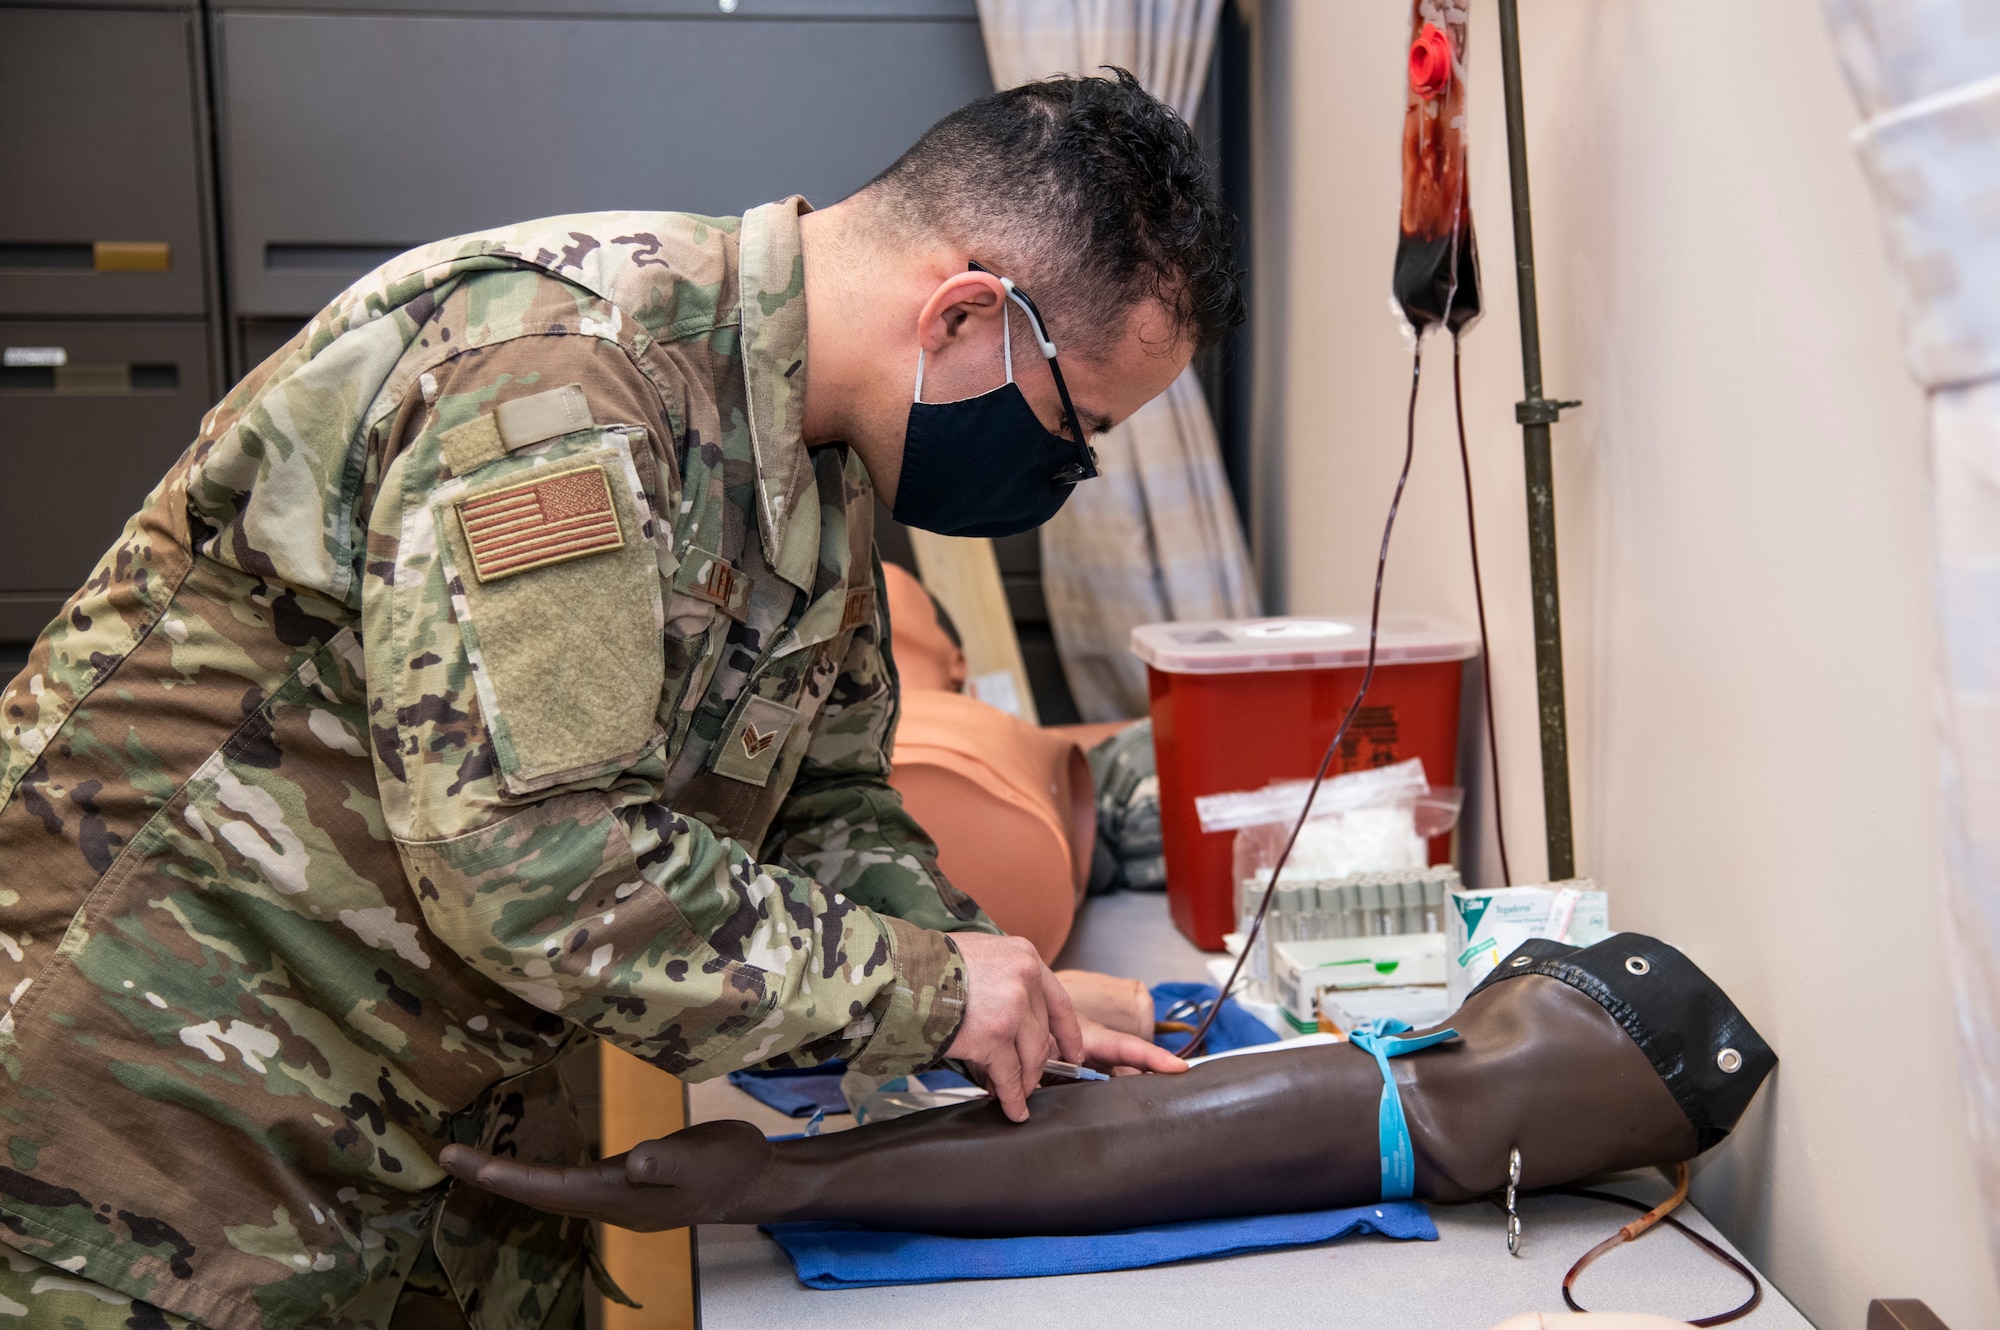 U.S. Air Force Senior Airman Issac Loreno, 932nd Airlift Wing, medical group, medical technician, practices drawing blood, Scott Air Force Base, Illinois, April 30, 2021. Loreno was nominated to do the airman spotlight for the May unit training assembly. (U.S. Air Force photo by Senior Airman Brooke Spenner)